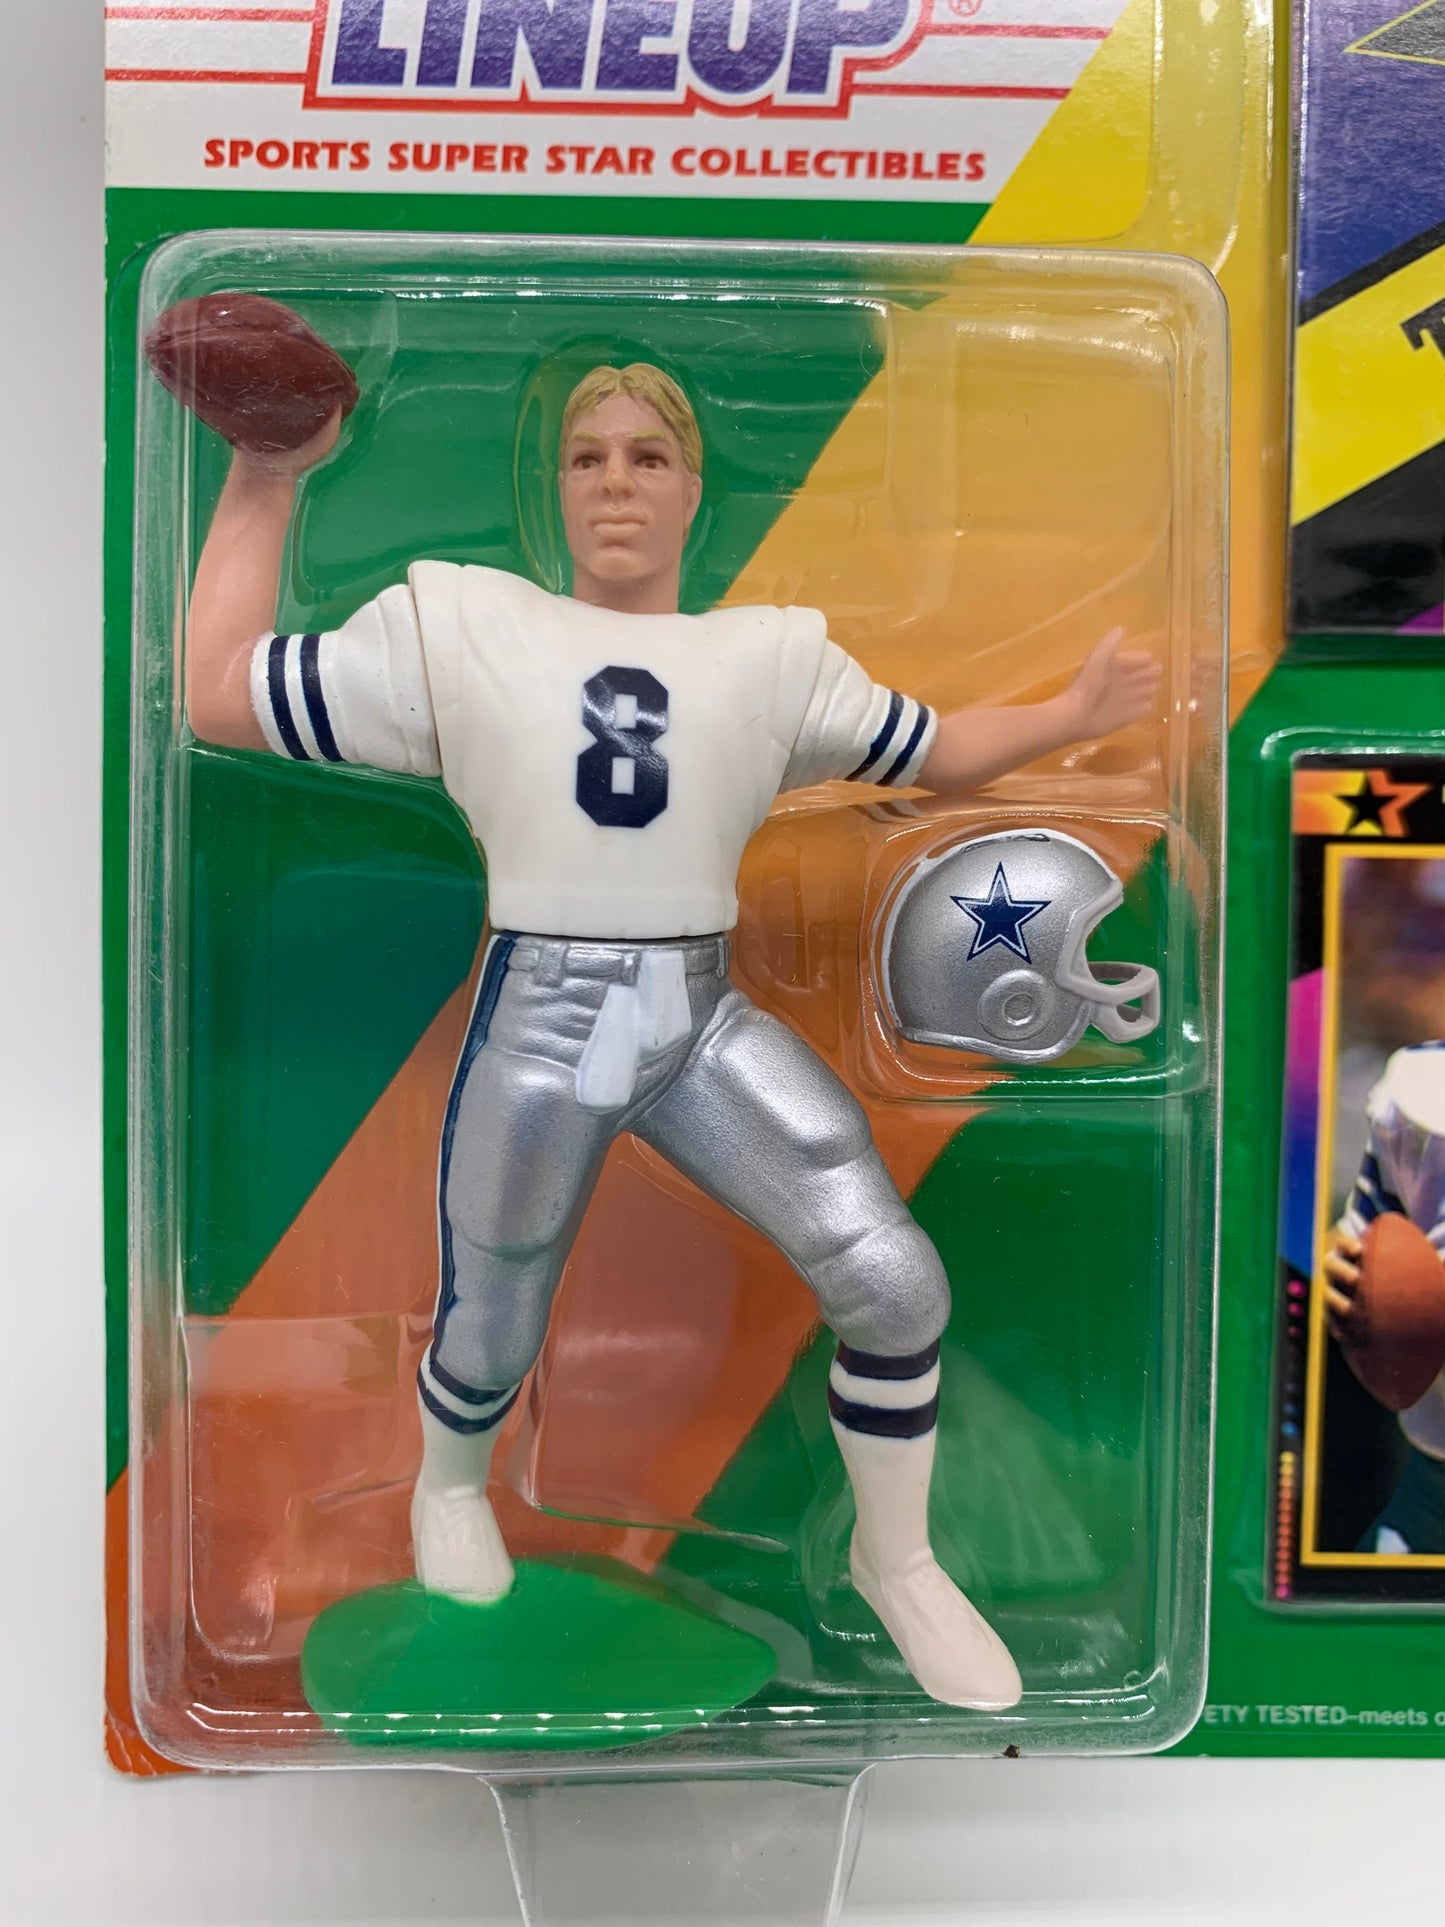 Starting Lineup Troy Aikman Dallas Cowboys White 1992 Edition Kenner Miniature Collectible NFL Action Figure Football Card Cowboys Poster